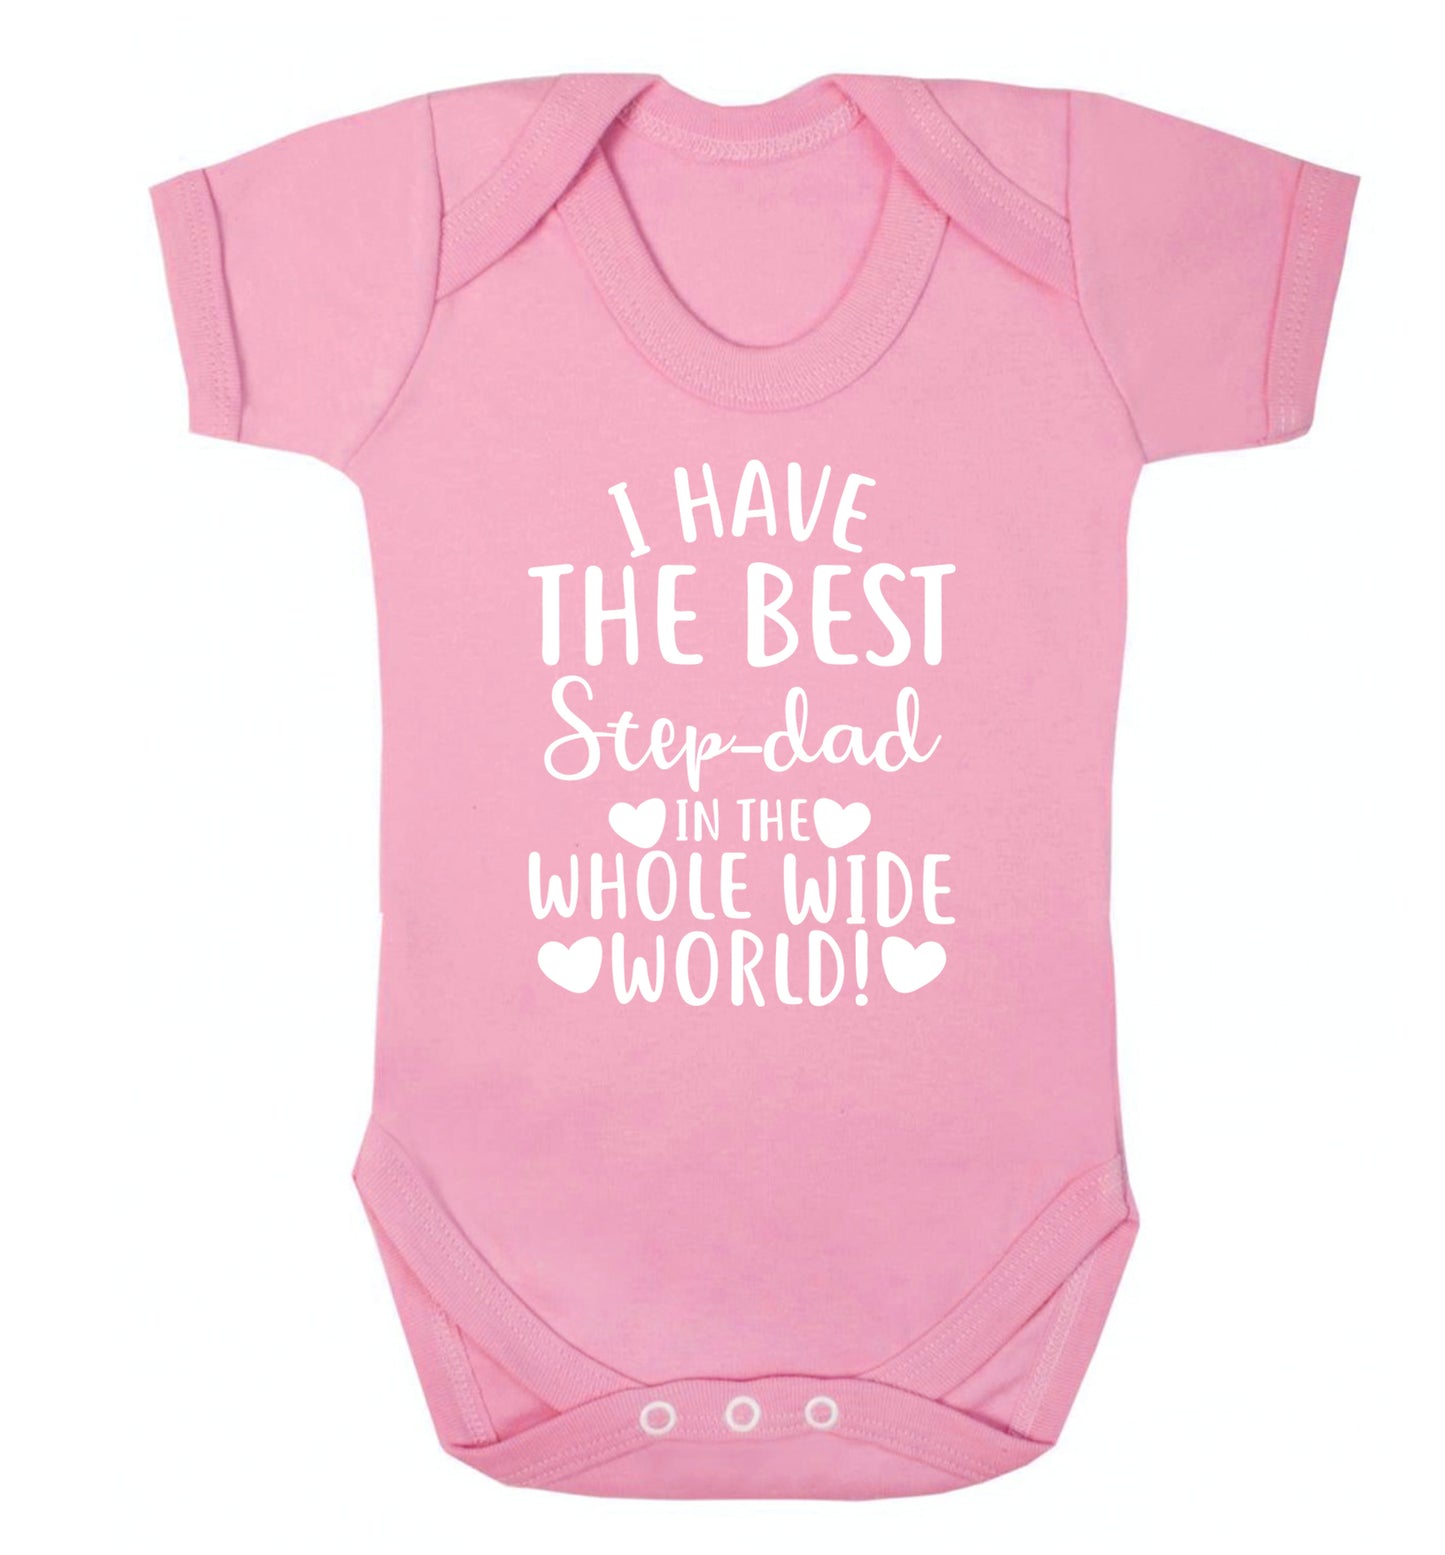 I have the best step-dad in the whole wide world! Baby Vest pale pink 18-24 months